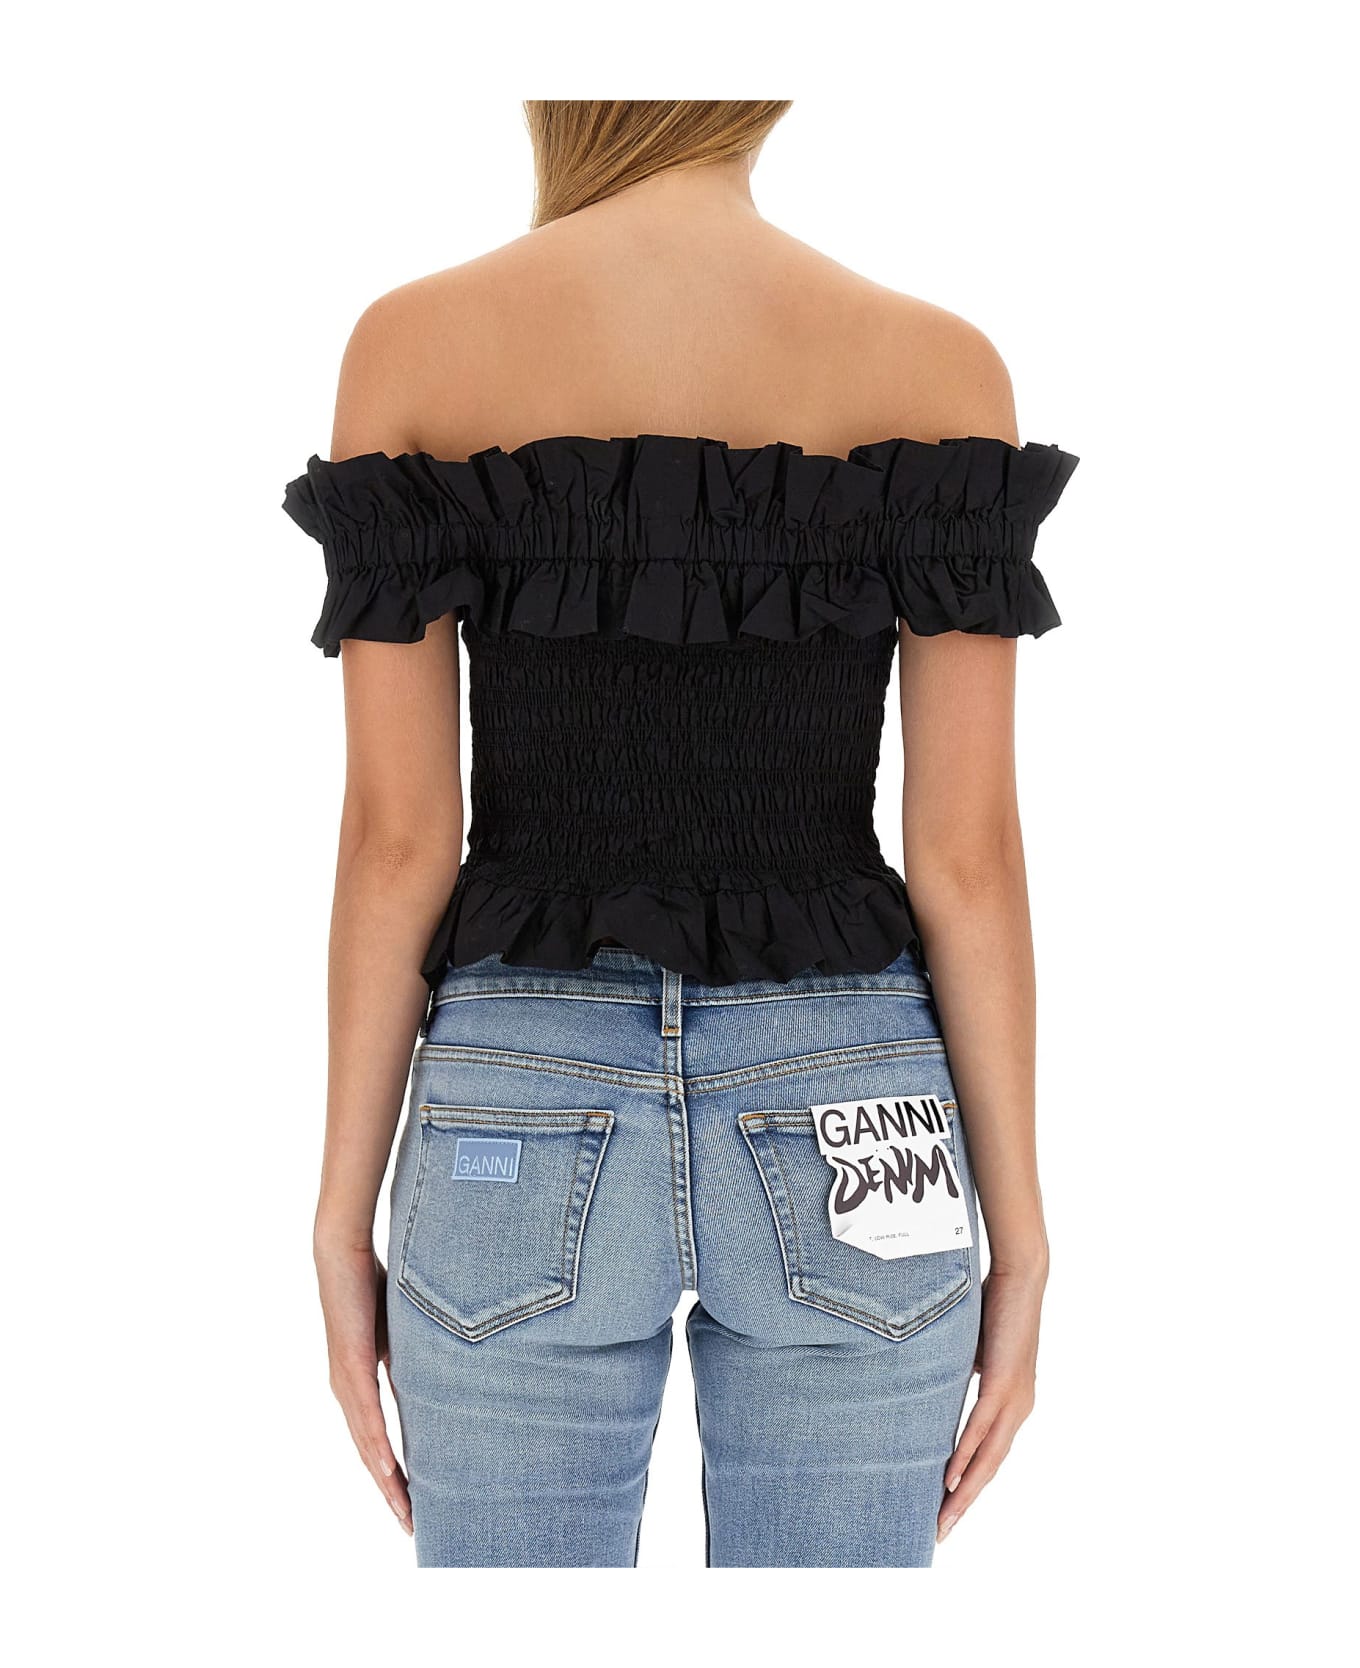 Ganni Top With Bare Shoulders - Black タンクトップ